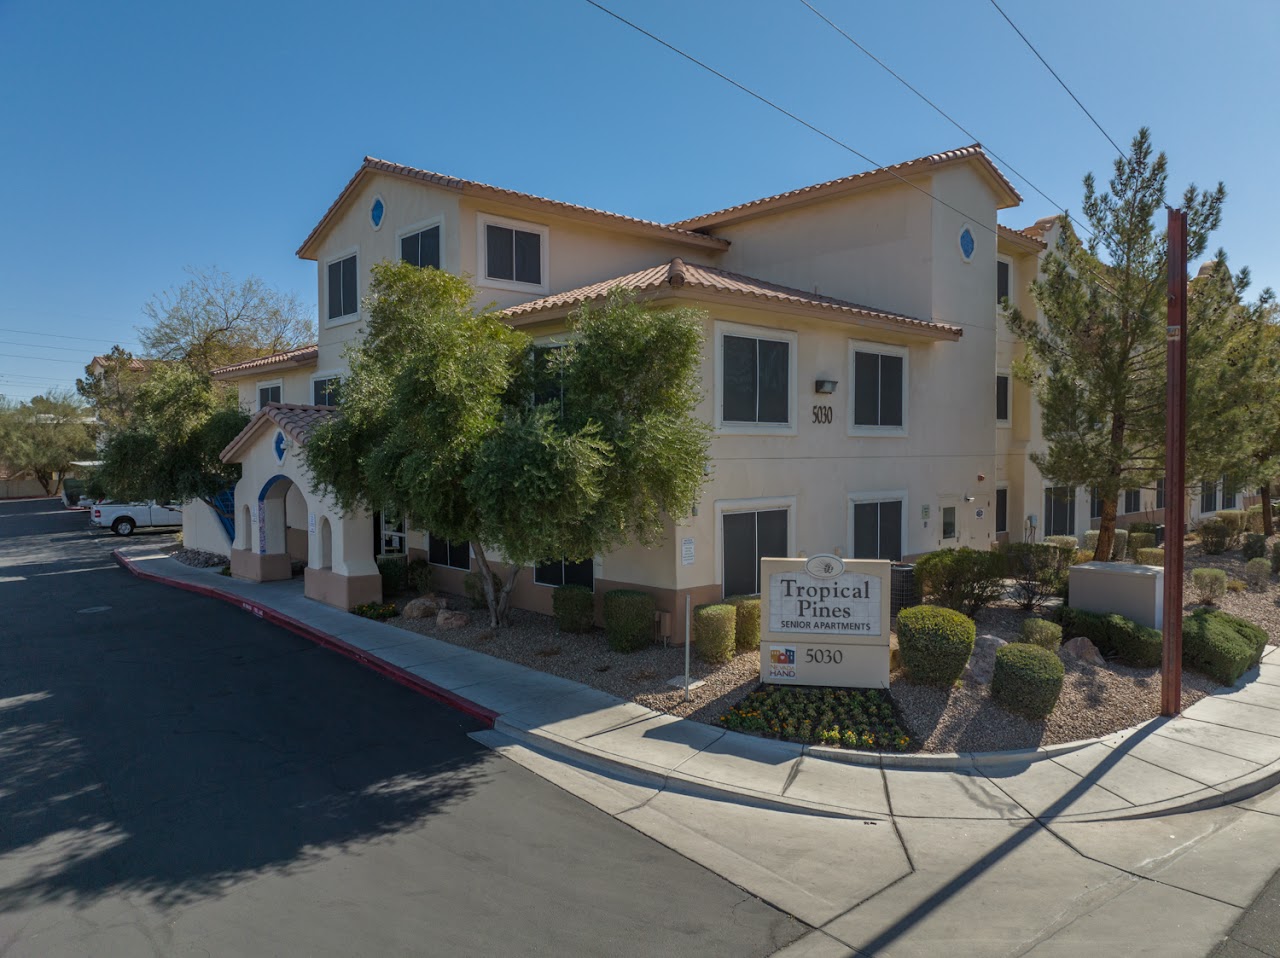 Photo of TROPICAL PINES SENIOR LIVING. Affordable housing located at 5030 S JEFFREYS LAS VEGAS, NV 89119